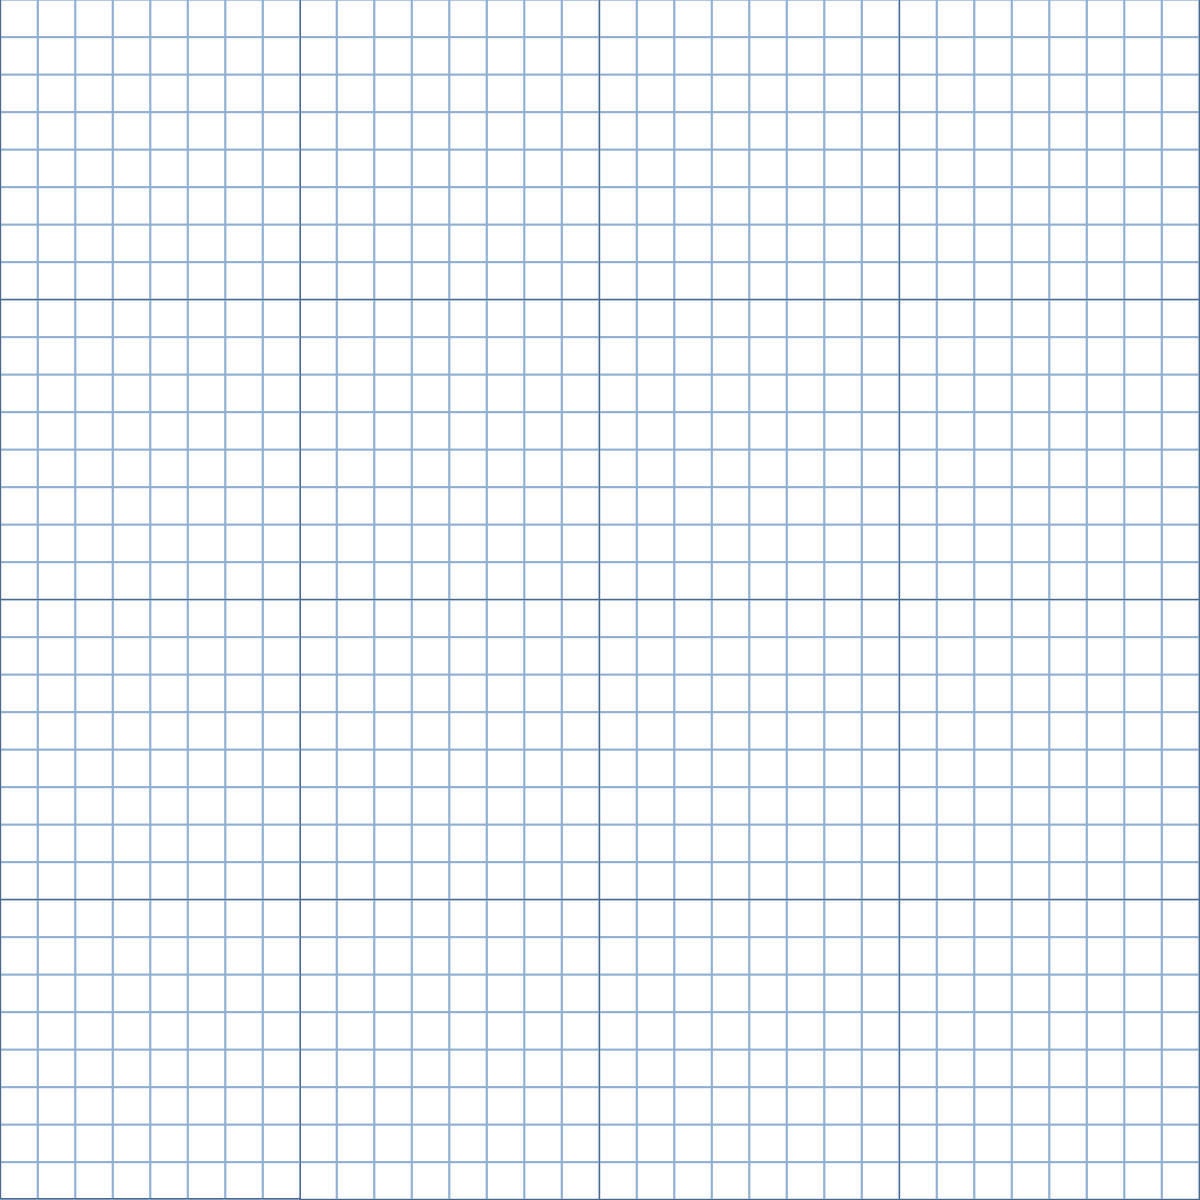 GRID / GRAPH PAPER A0, A1, A21 Size Imperial 1 Inch 1/8th